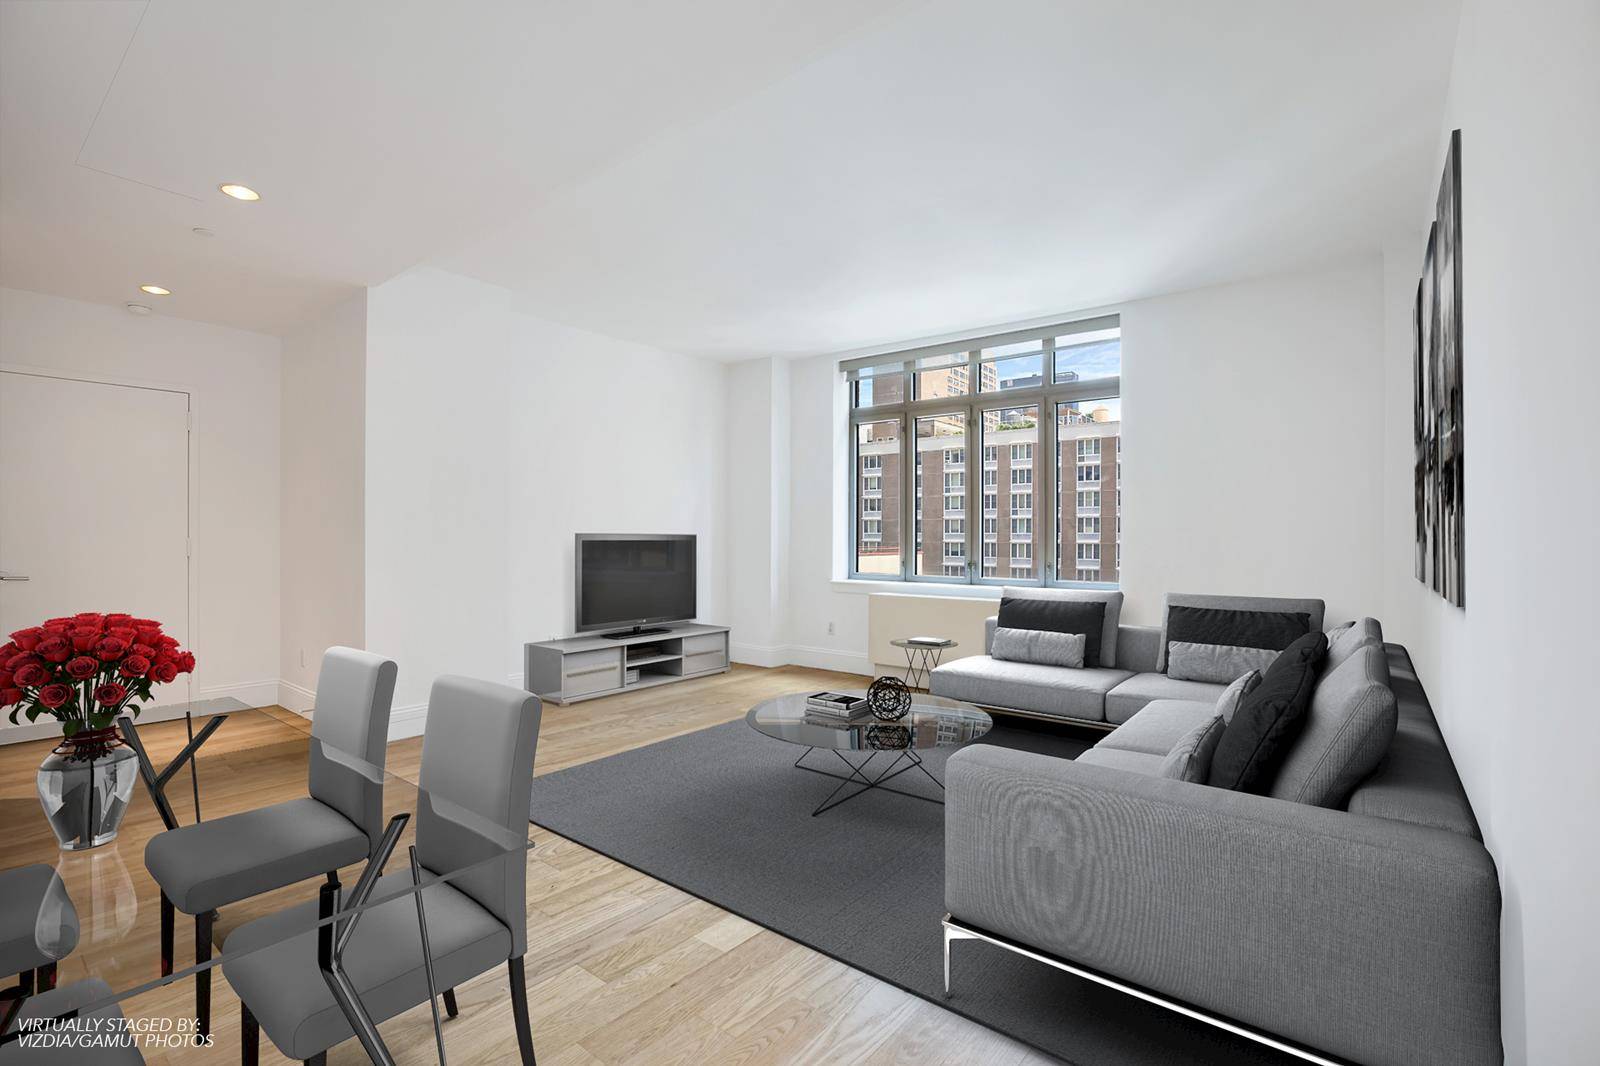 The Apartment is located in the heart of Chelsea Flatiron within walking distance to retail and restaurant scene, along with Eataly, Whole Foods, Trader Joe's and 23rd Street subway stations ...